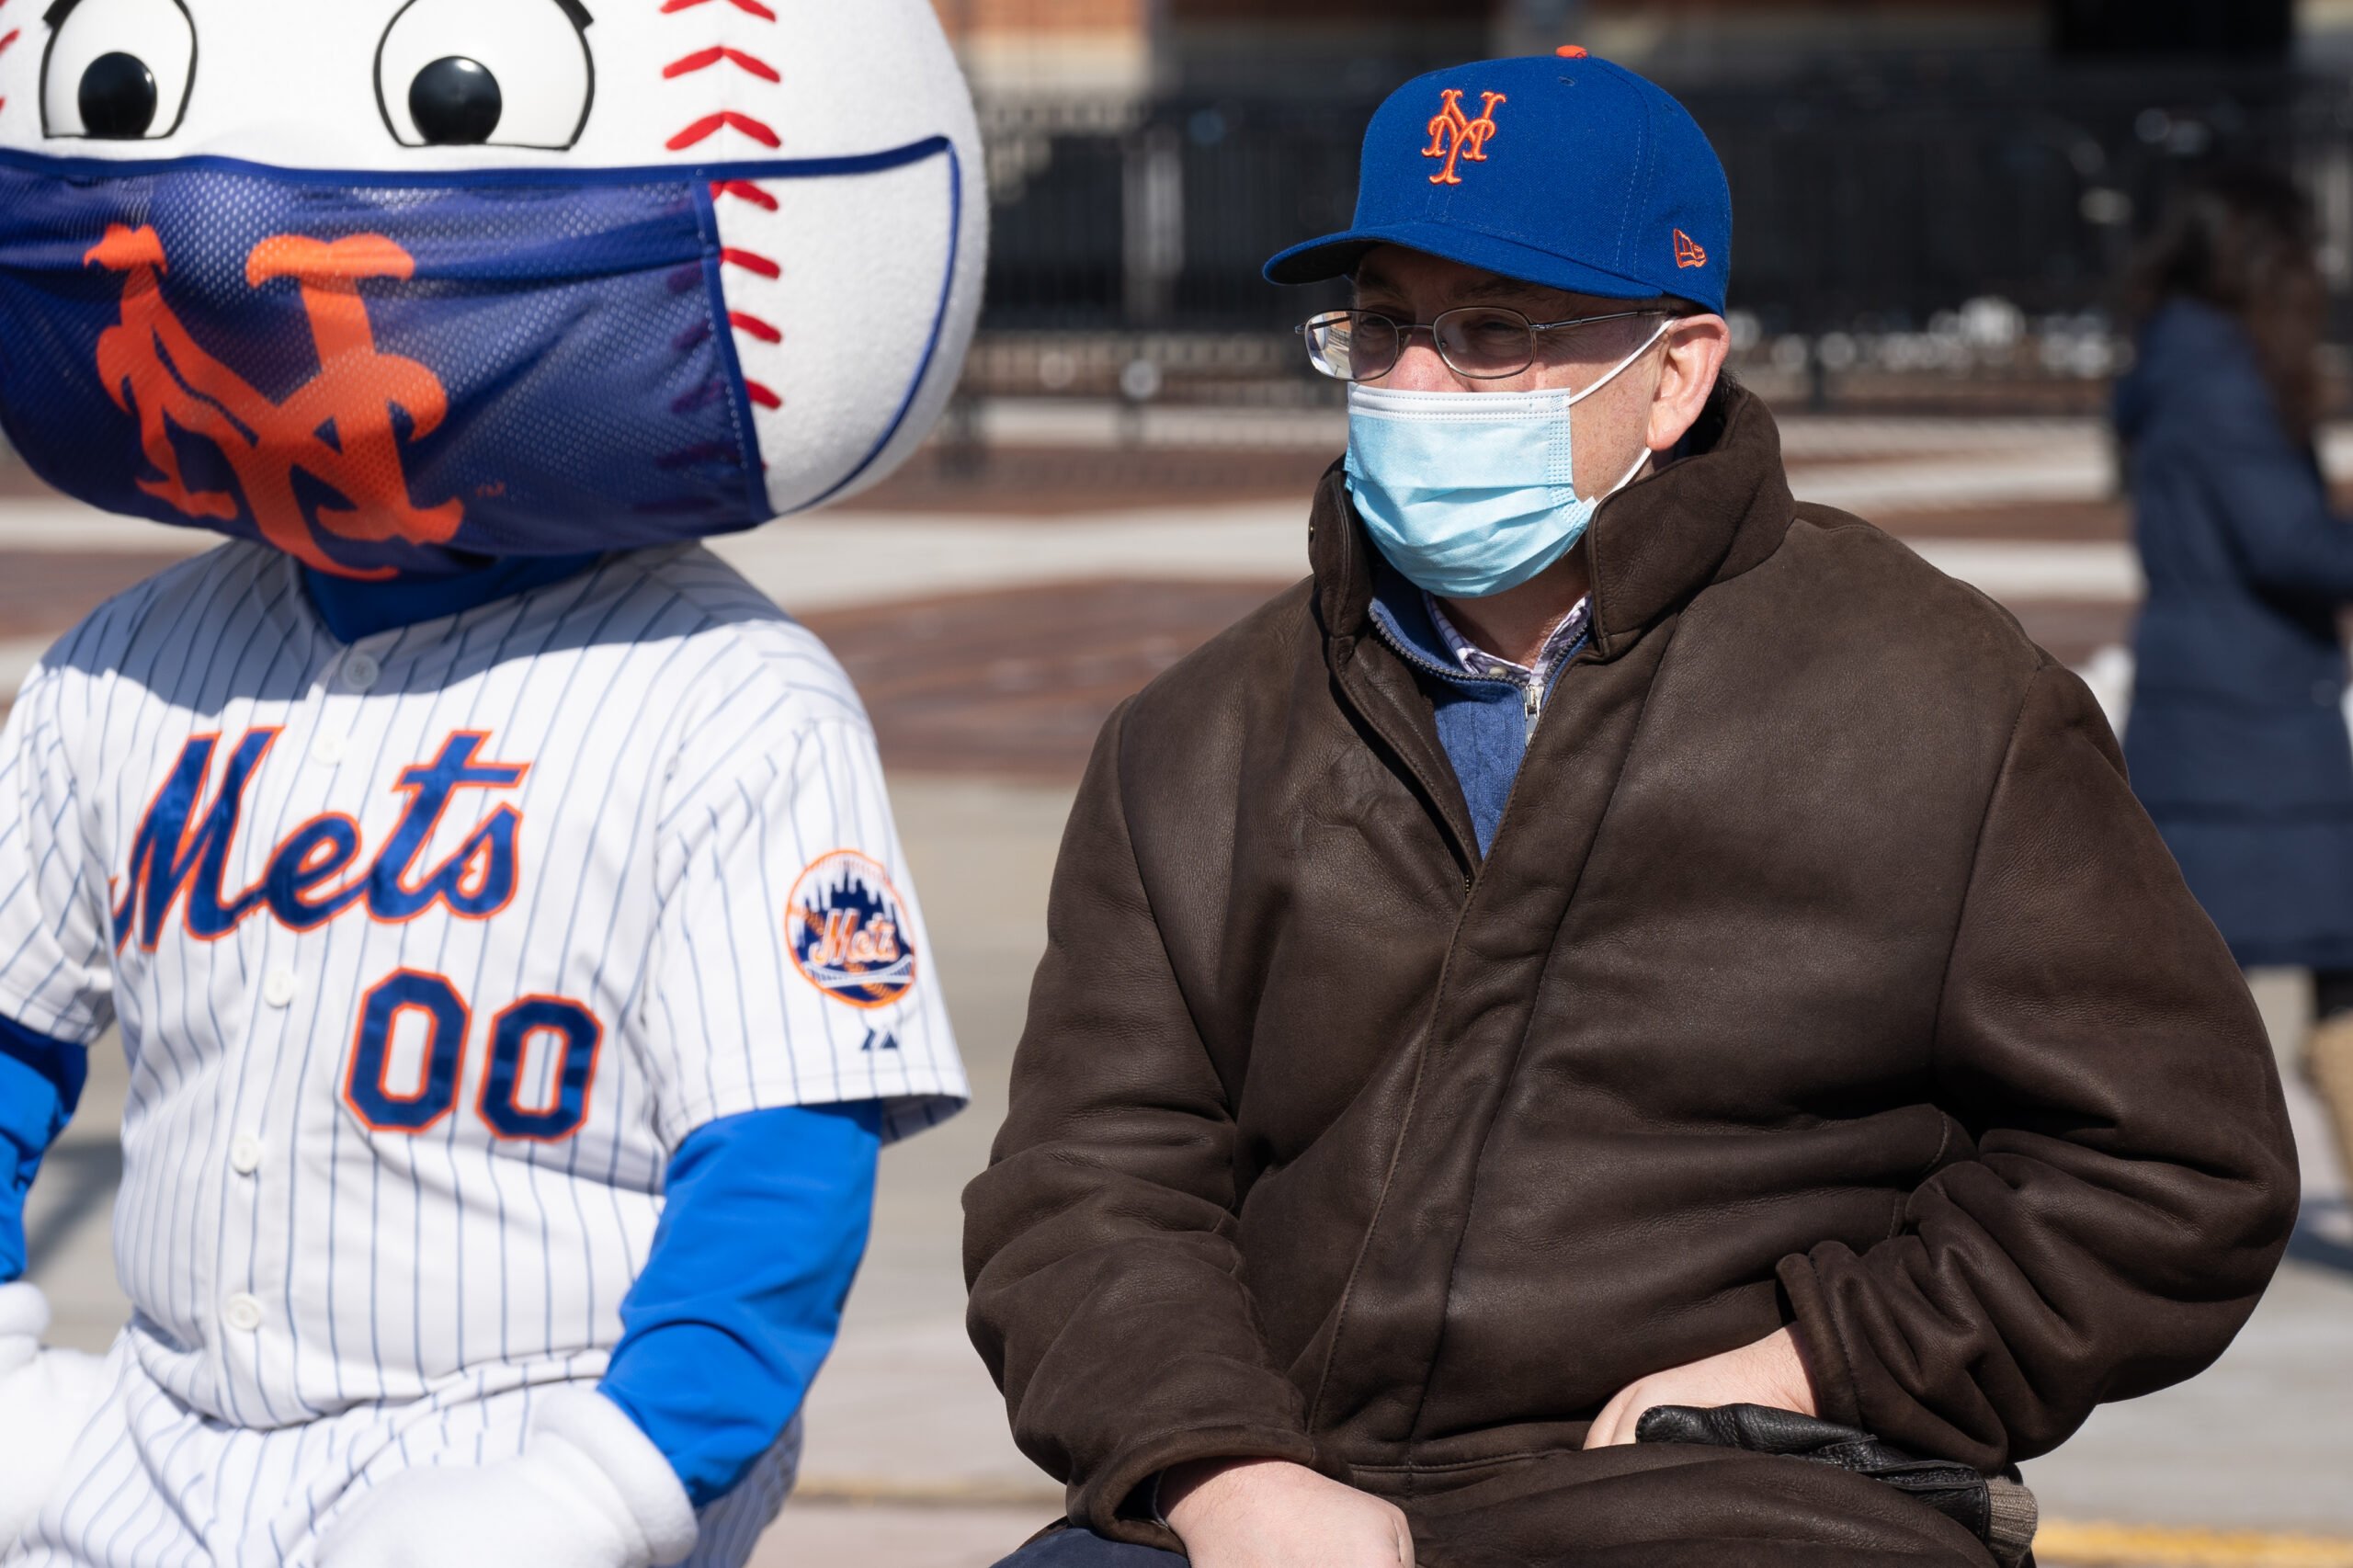 Steve Cohen, owner of the Mets, seated next to "Mr. Met", the team's legendary mascot.